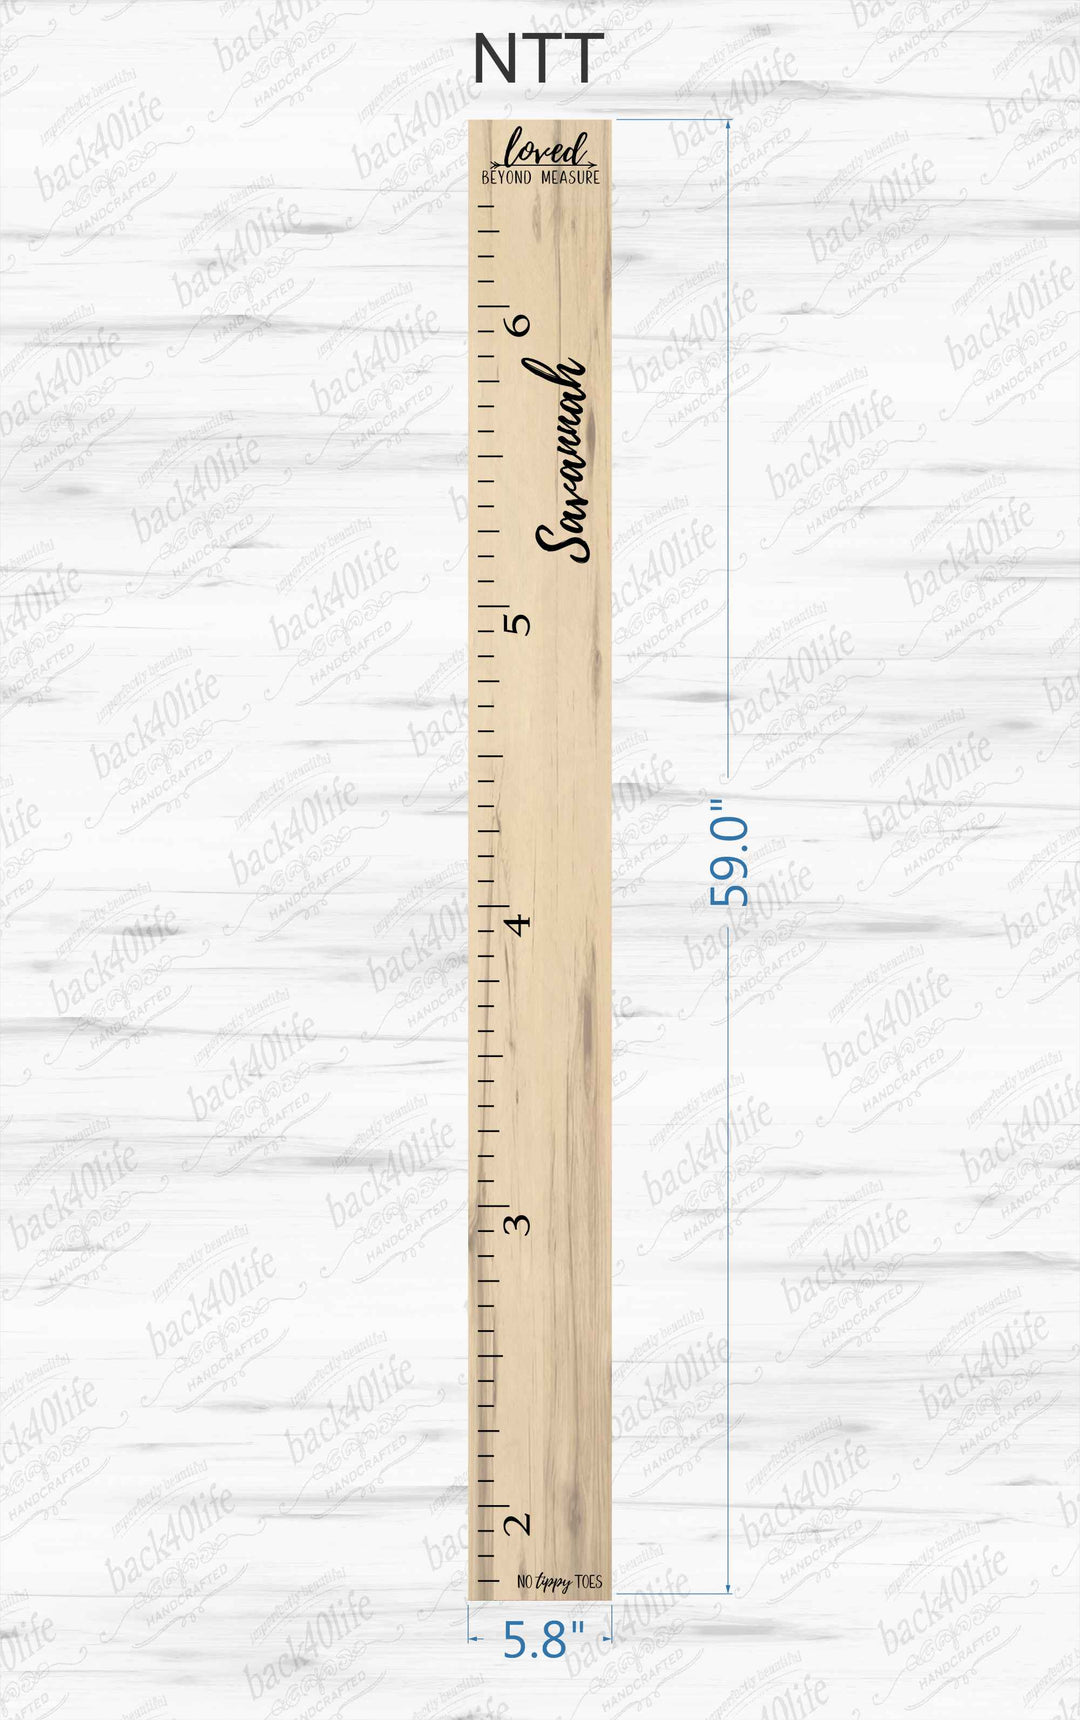 Personalized Wooden Kids Growth Chart - Height Ruler for Boys Girls Size Measuring Stick Family Name - Custom Ruler Gift Children GC-NTT-3P No Tippy Toes